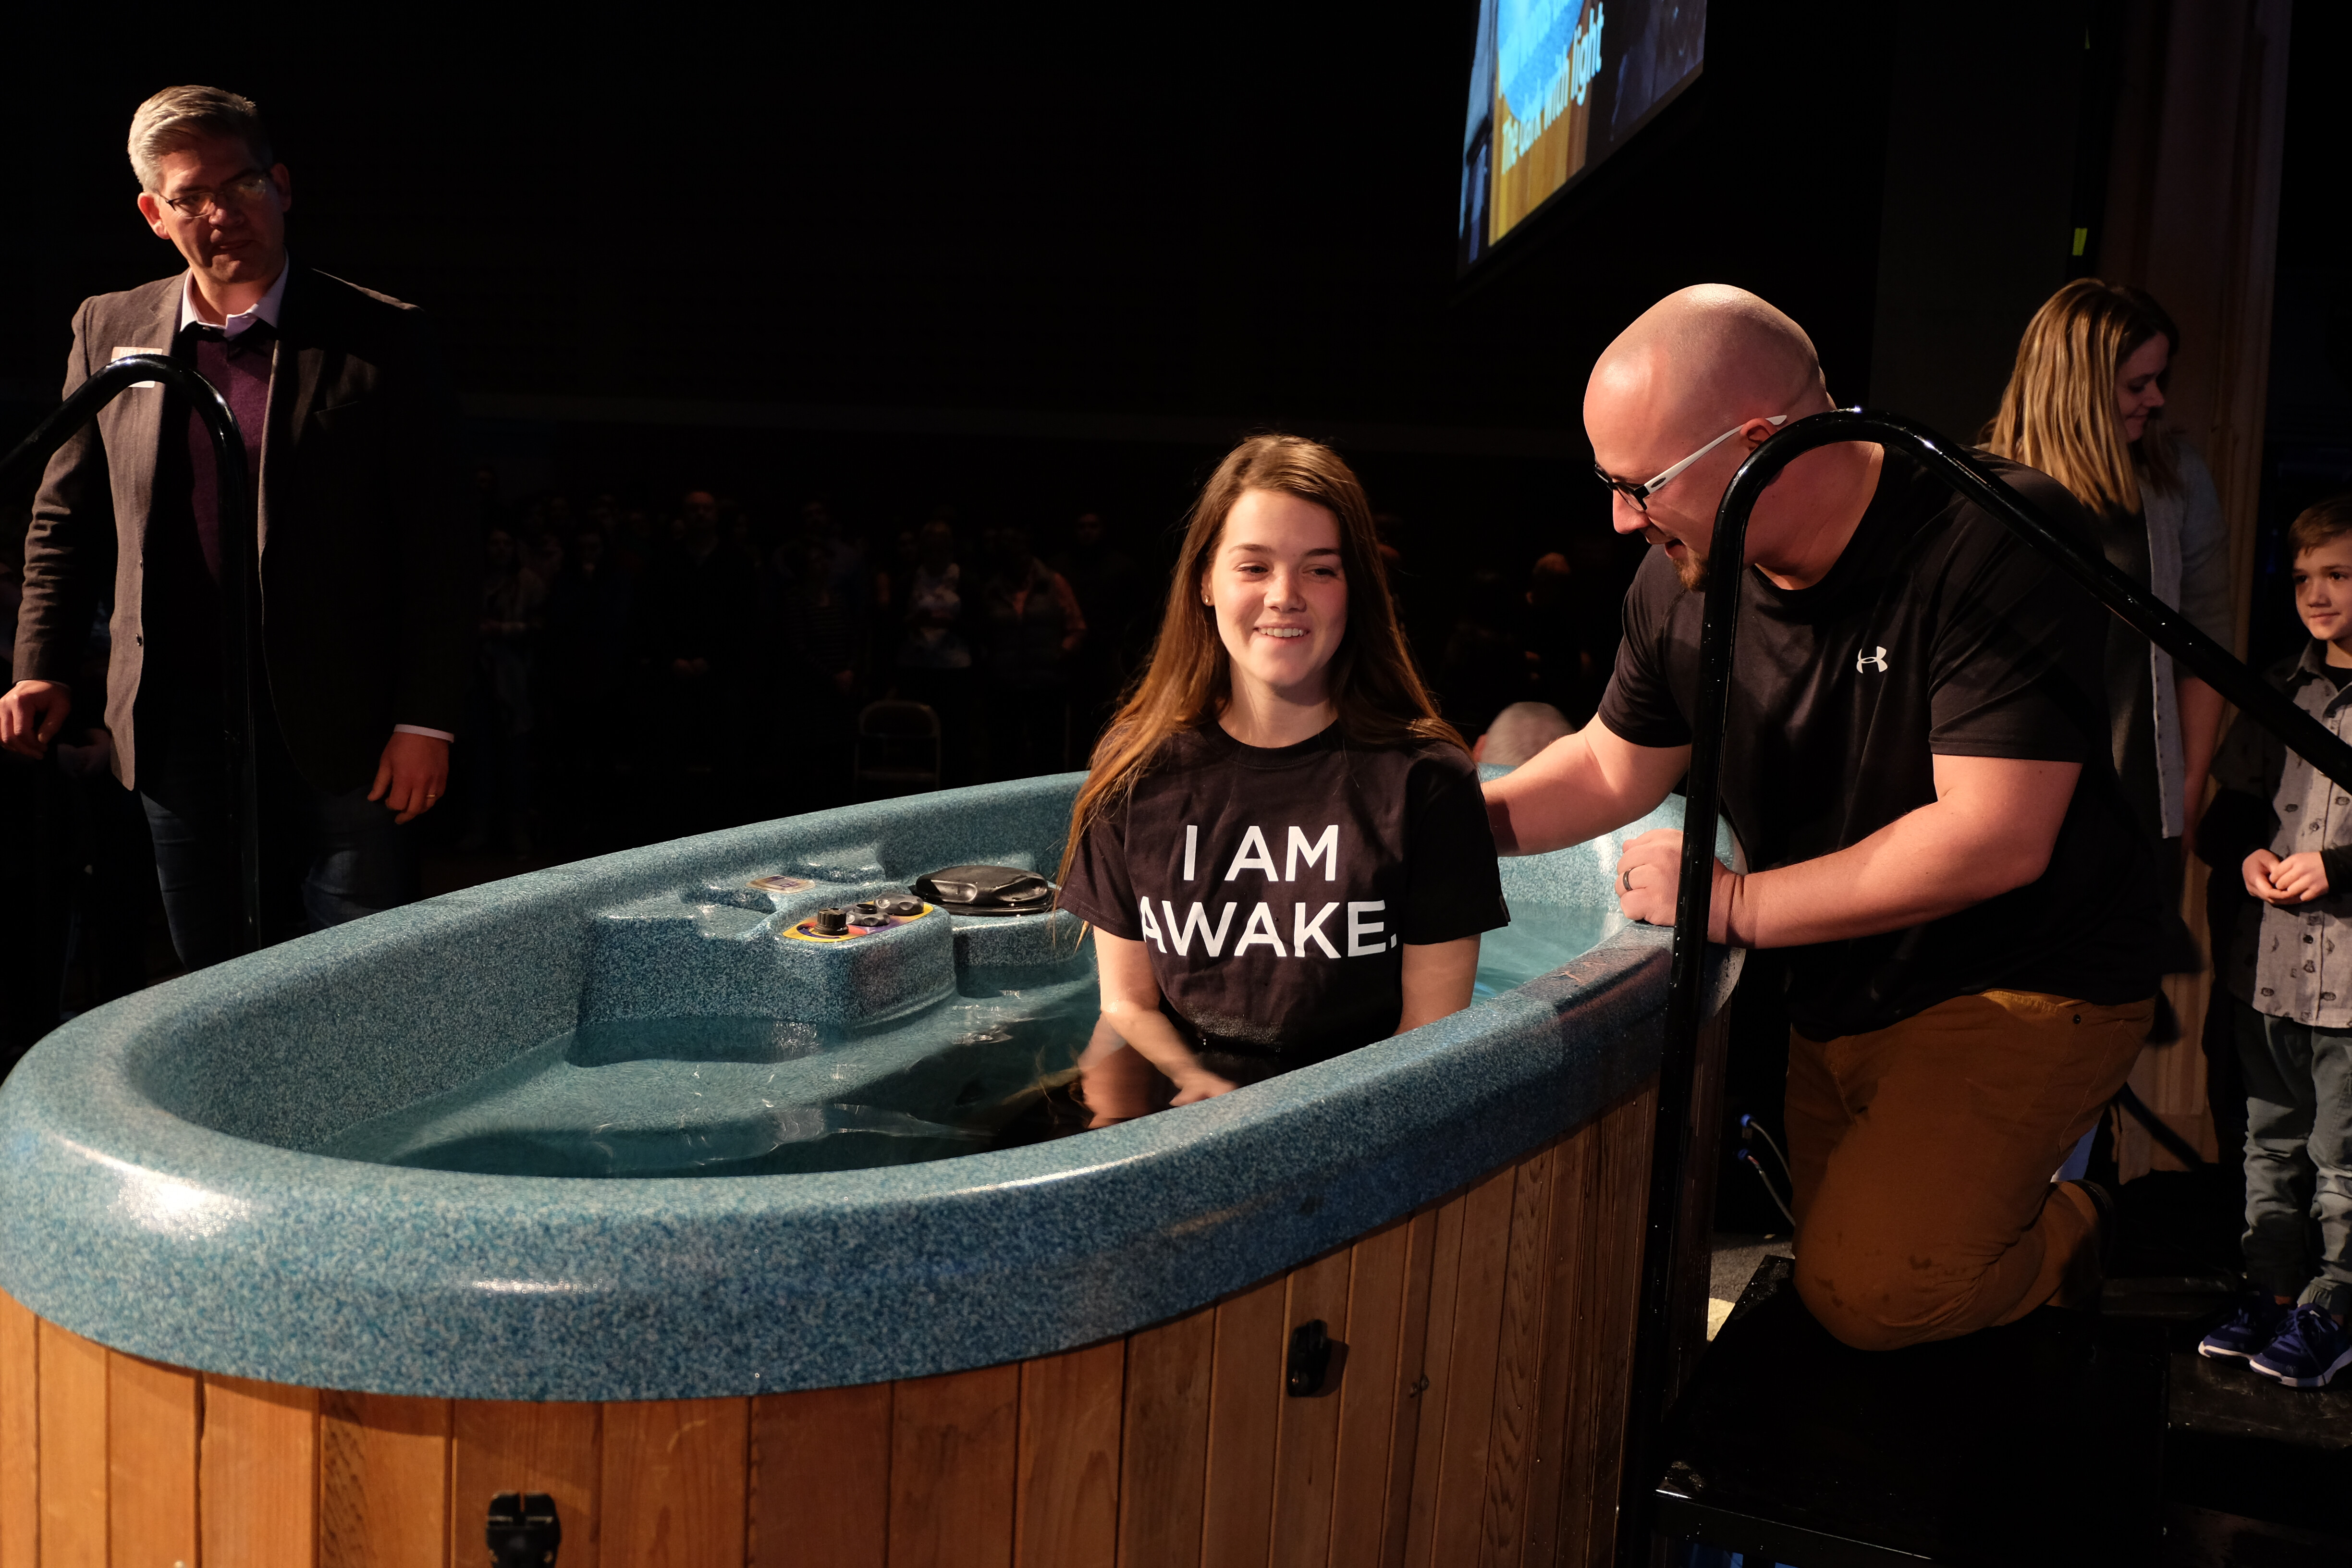 Following Jesus' example in baptism